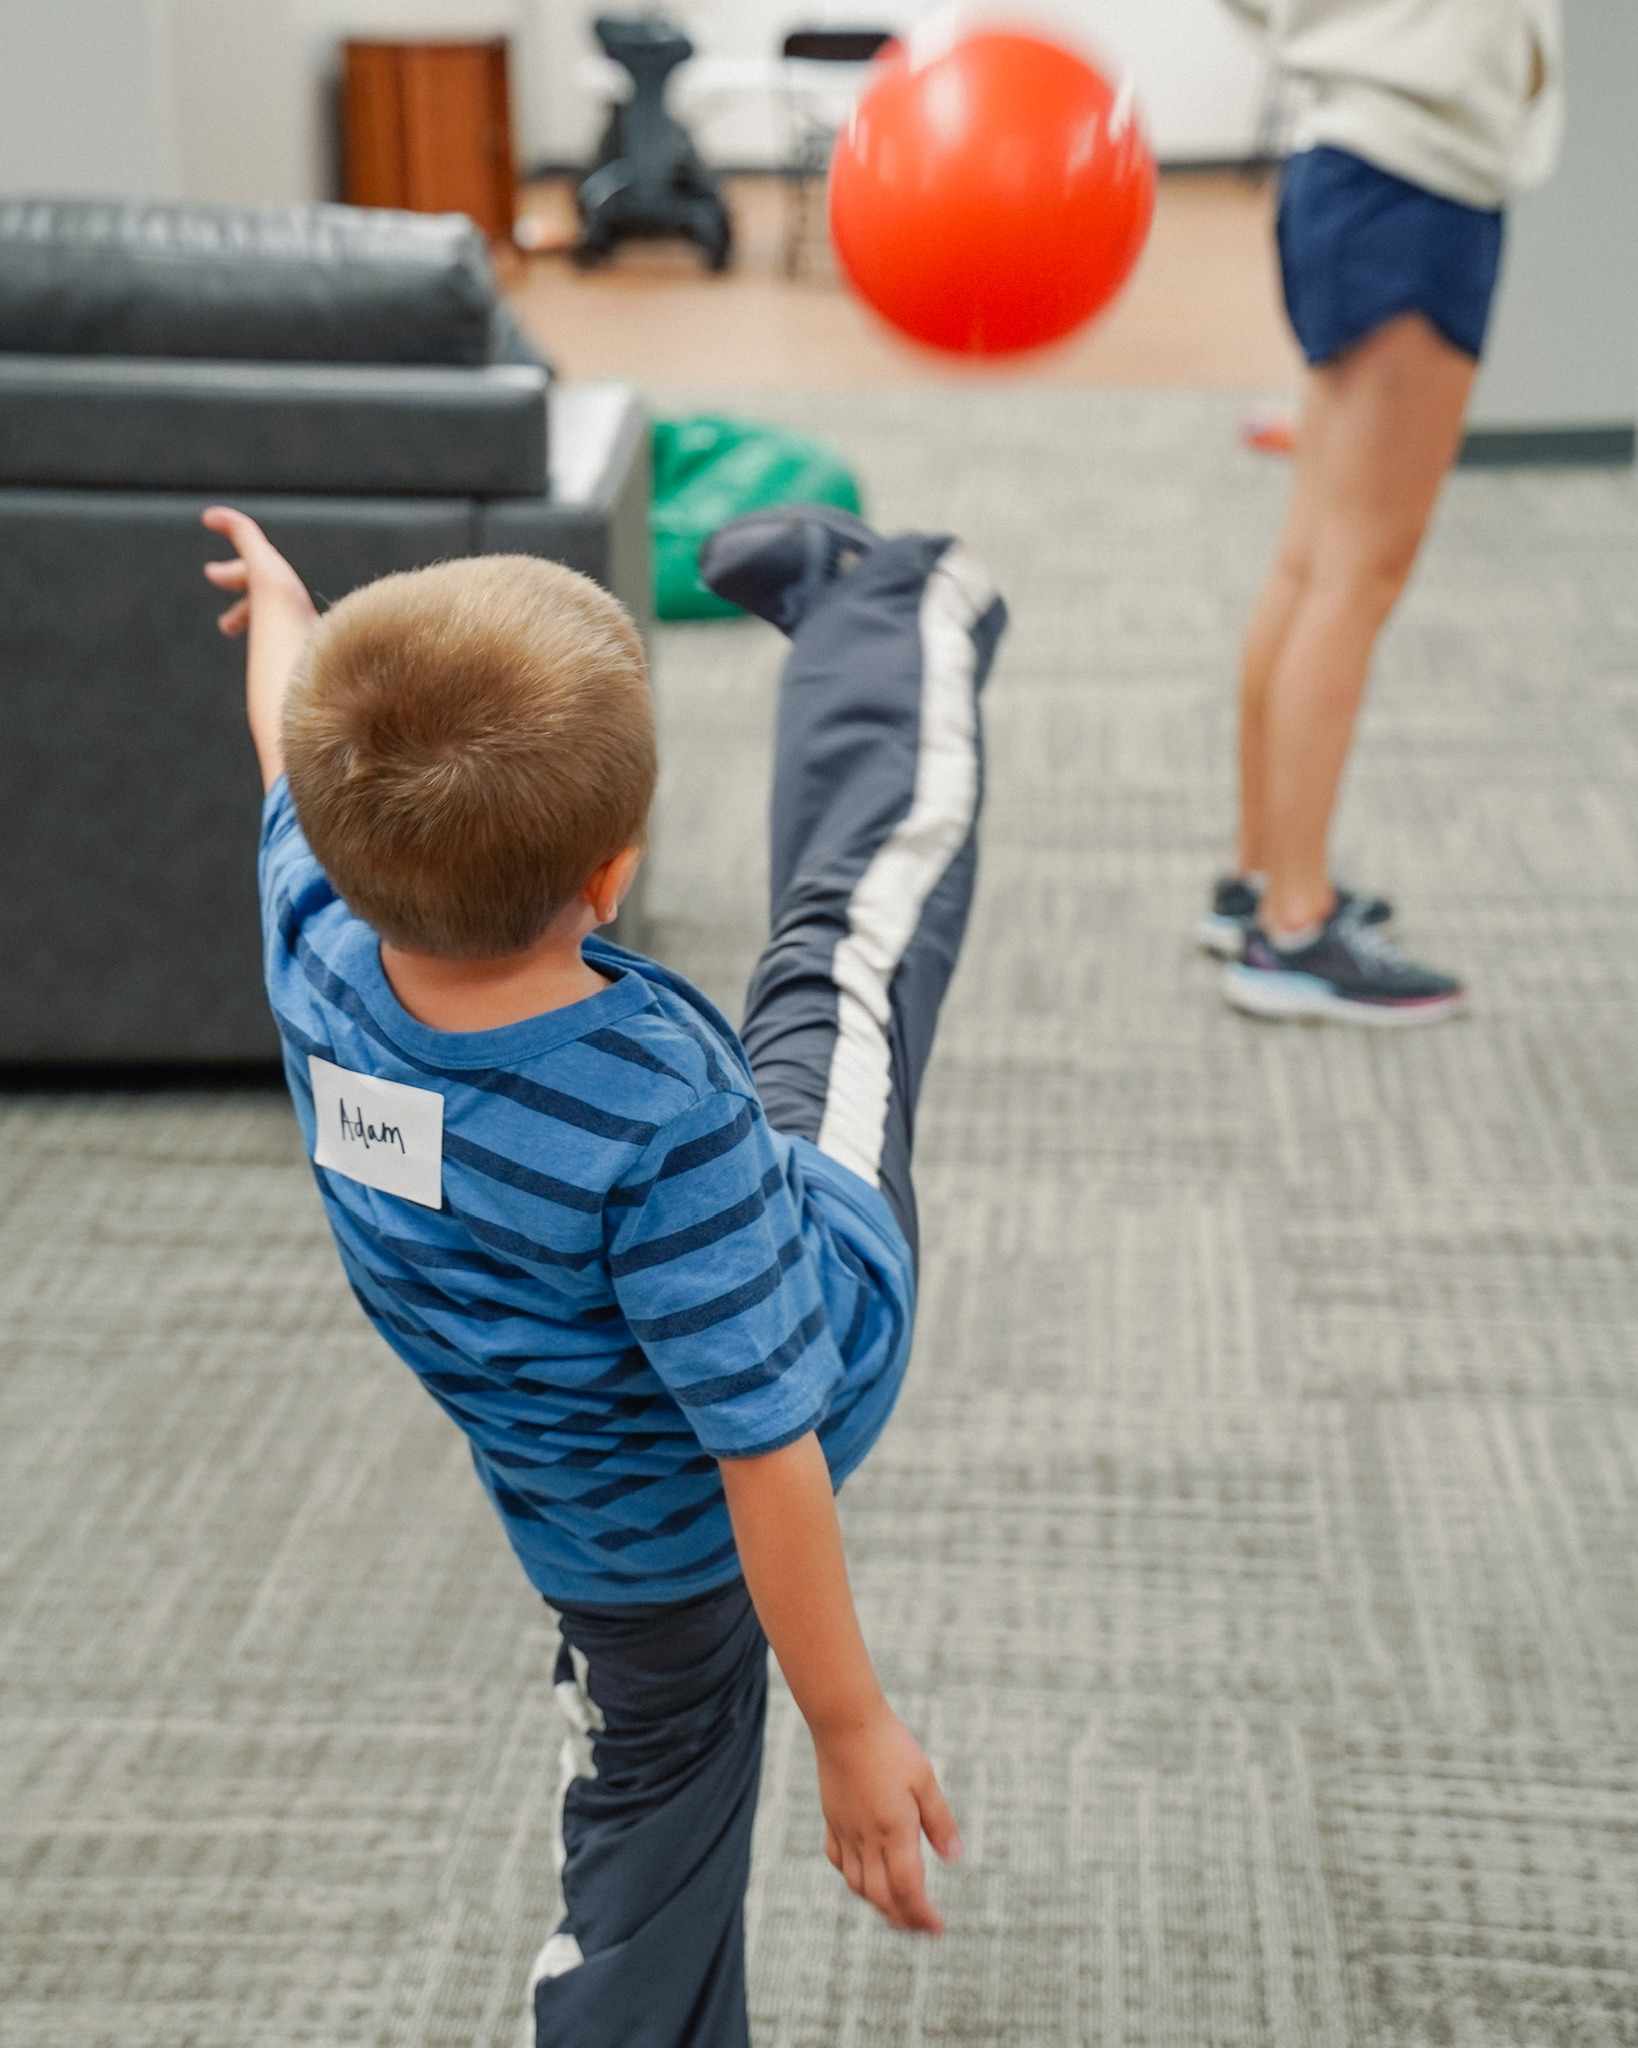 A young boy kicks a red ball high into the air inside a room